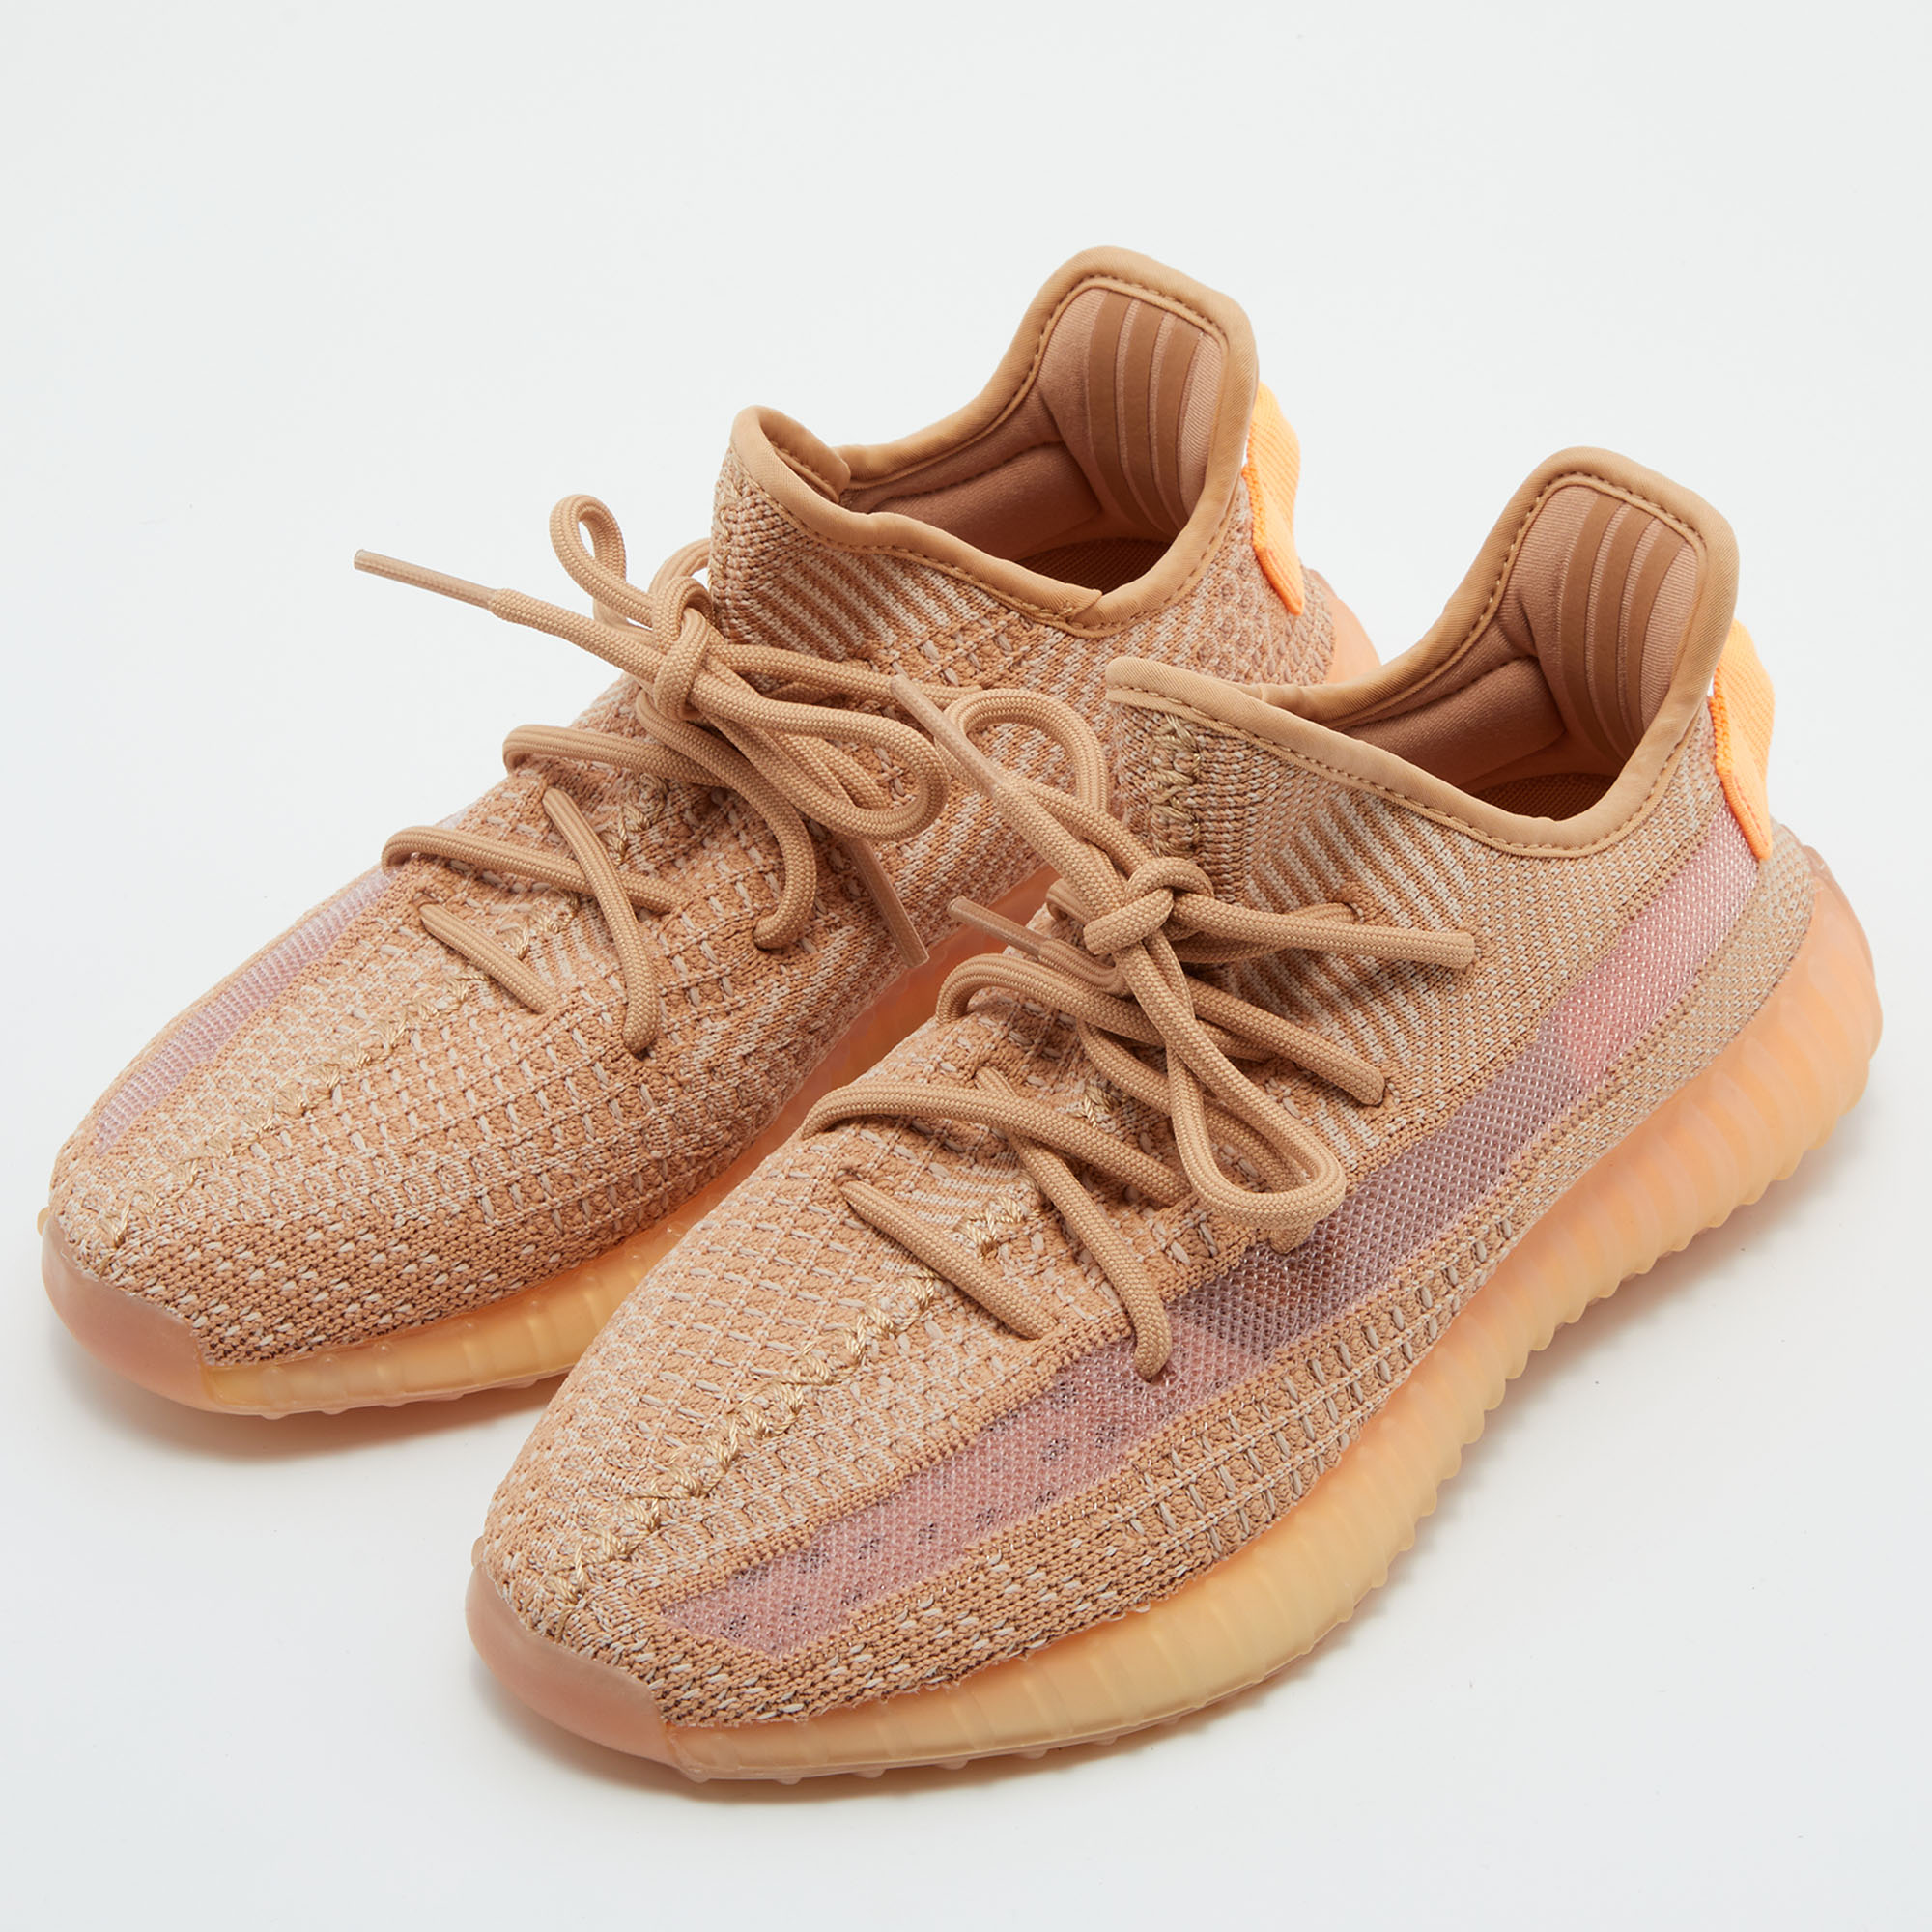 

Yeezy x Adidas Clay Knit Fabric Boost 350 V2 Sneakers Size 39 1/3, Brown